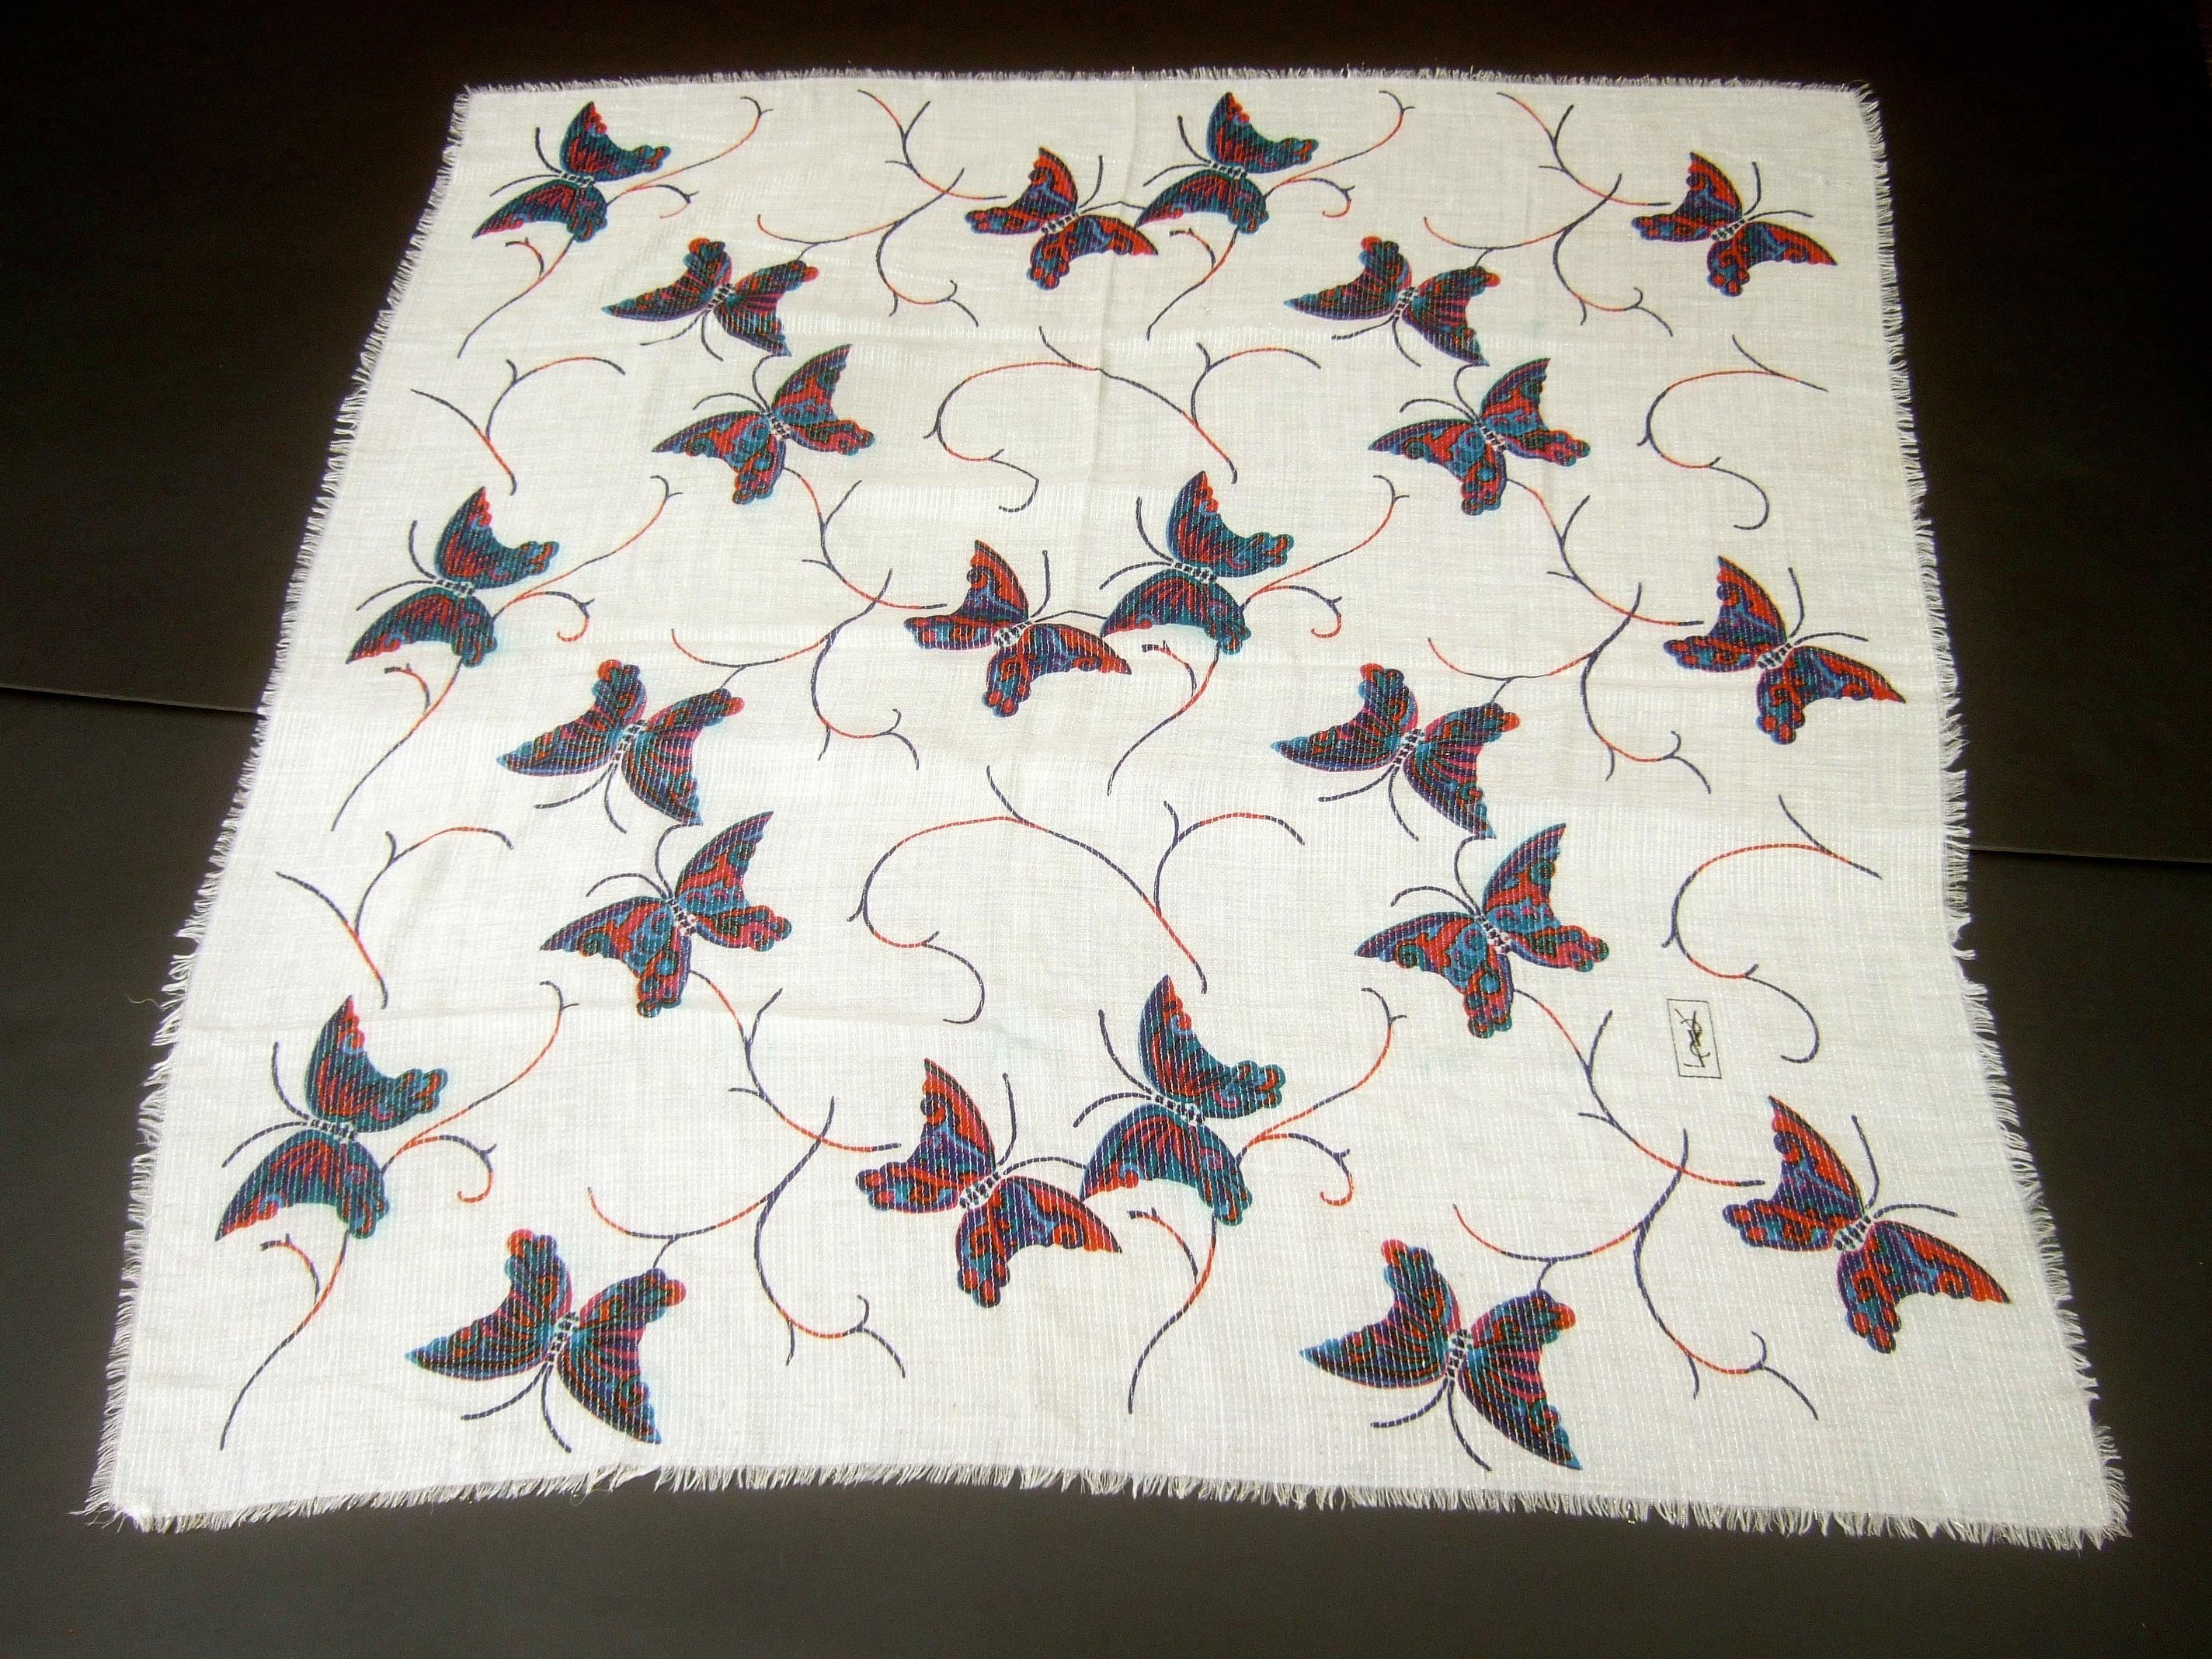 Women's Yves Saint Laurent Large Butterfly Print Scarf - Shawl Wrap 52 x 53 Circa 1970s 